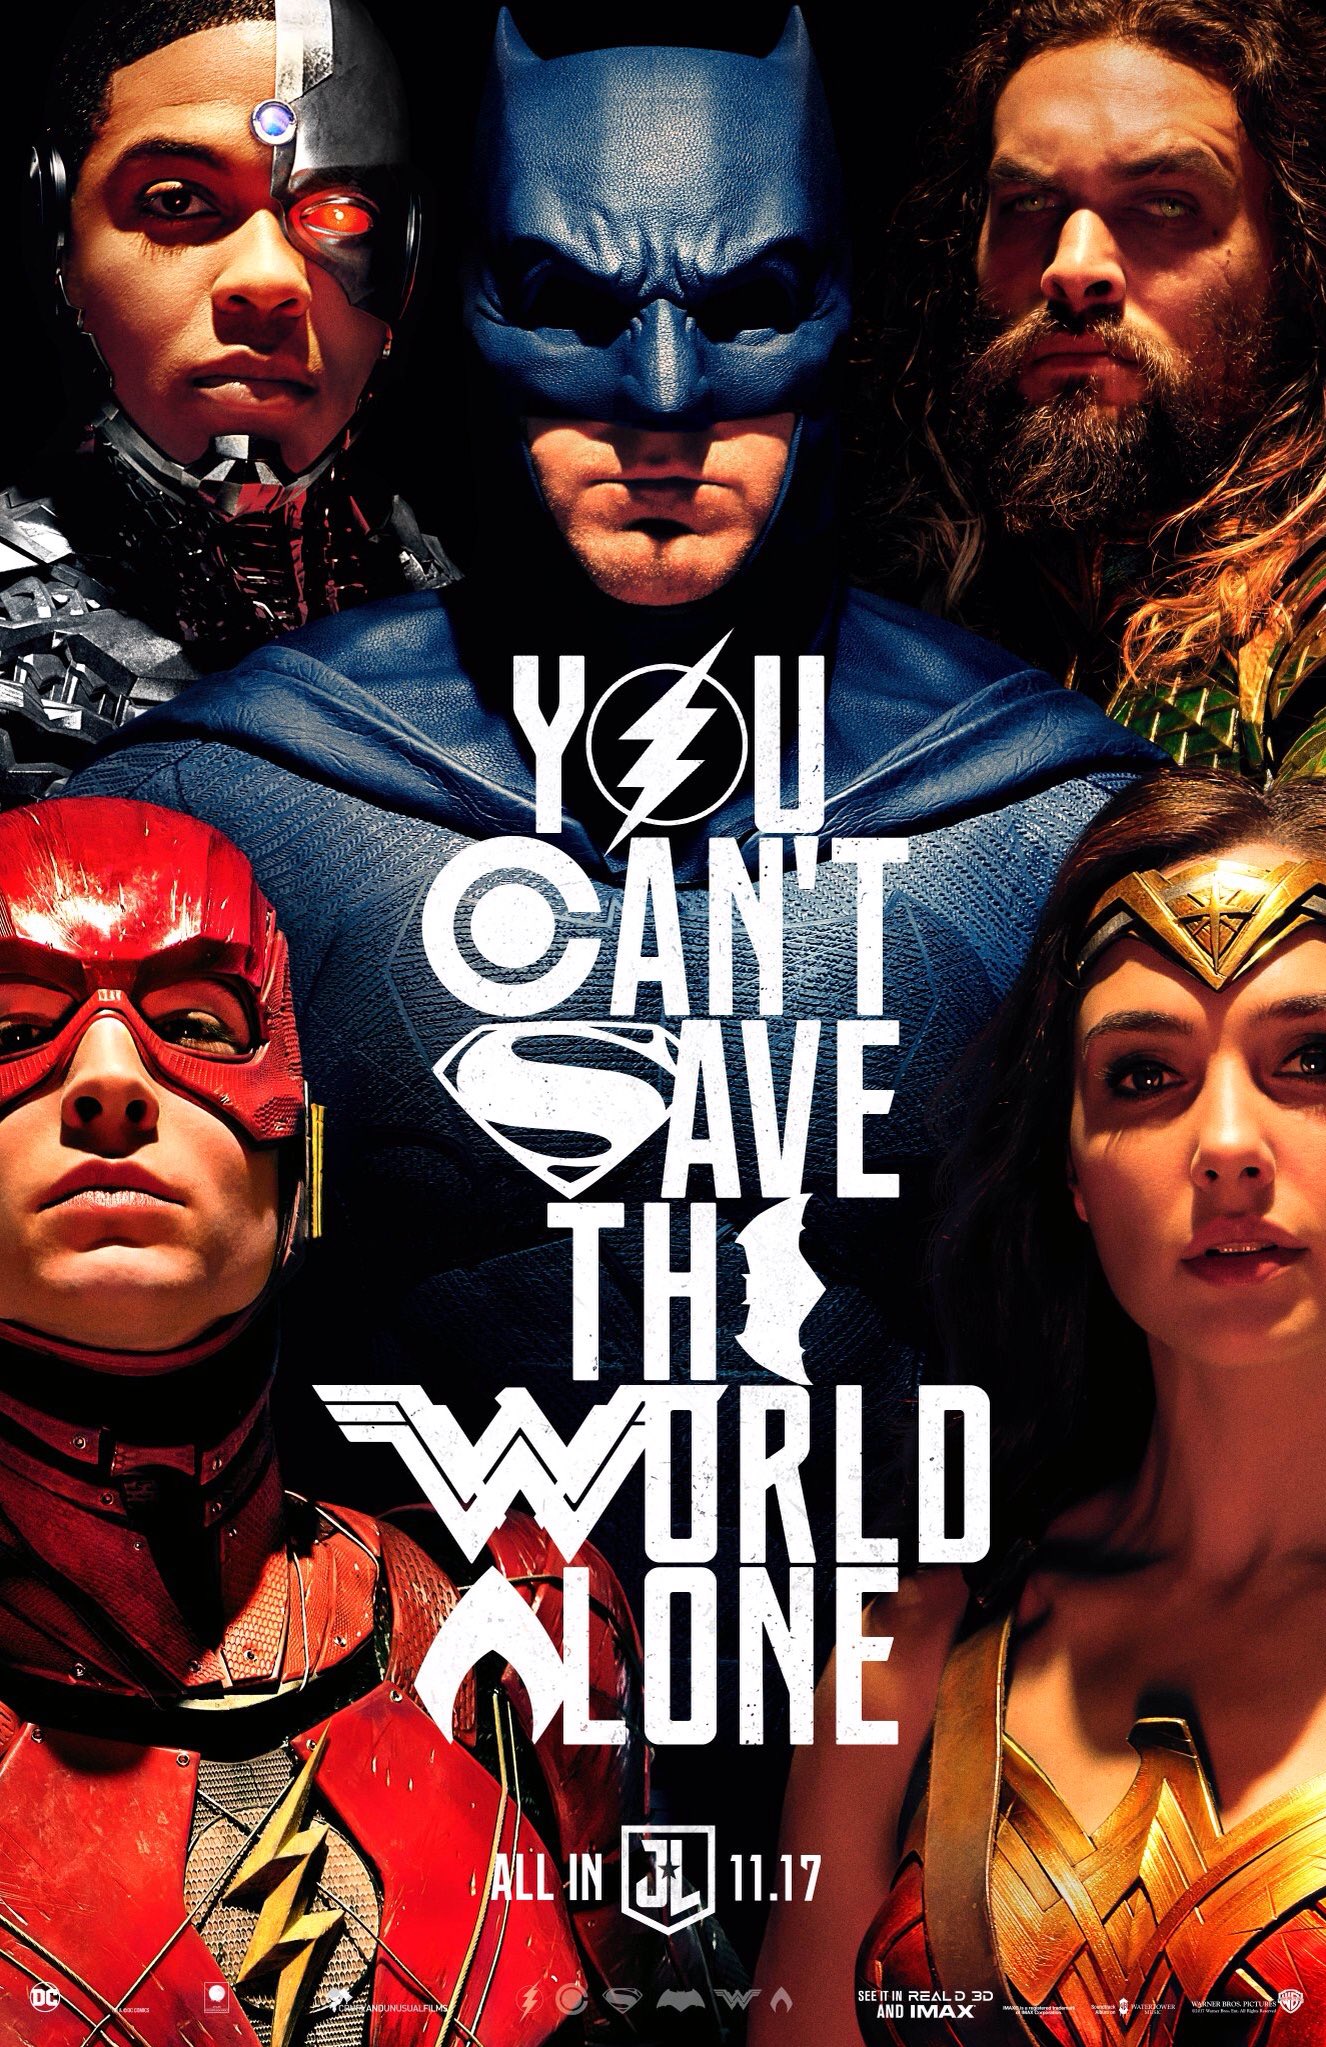 justice-league-poster